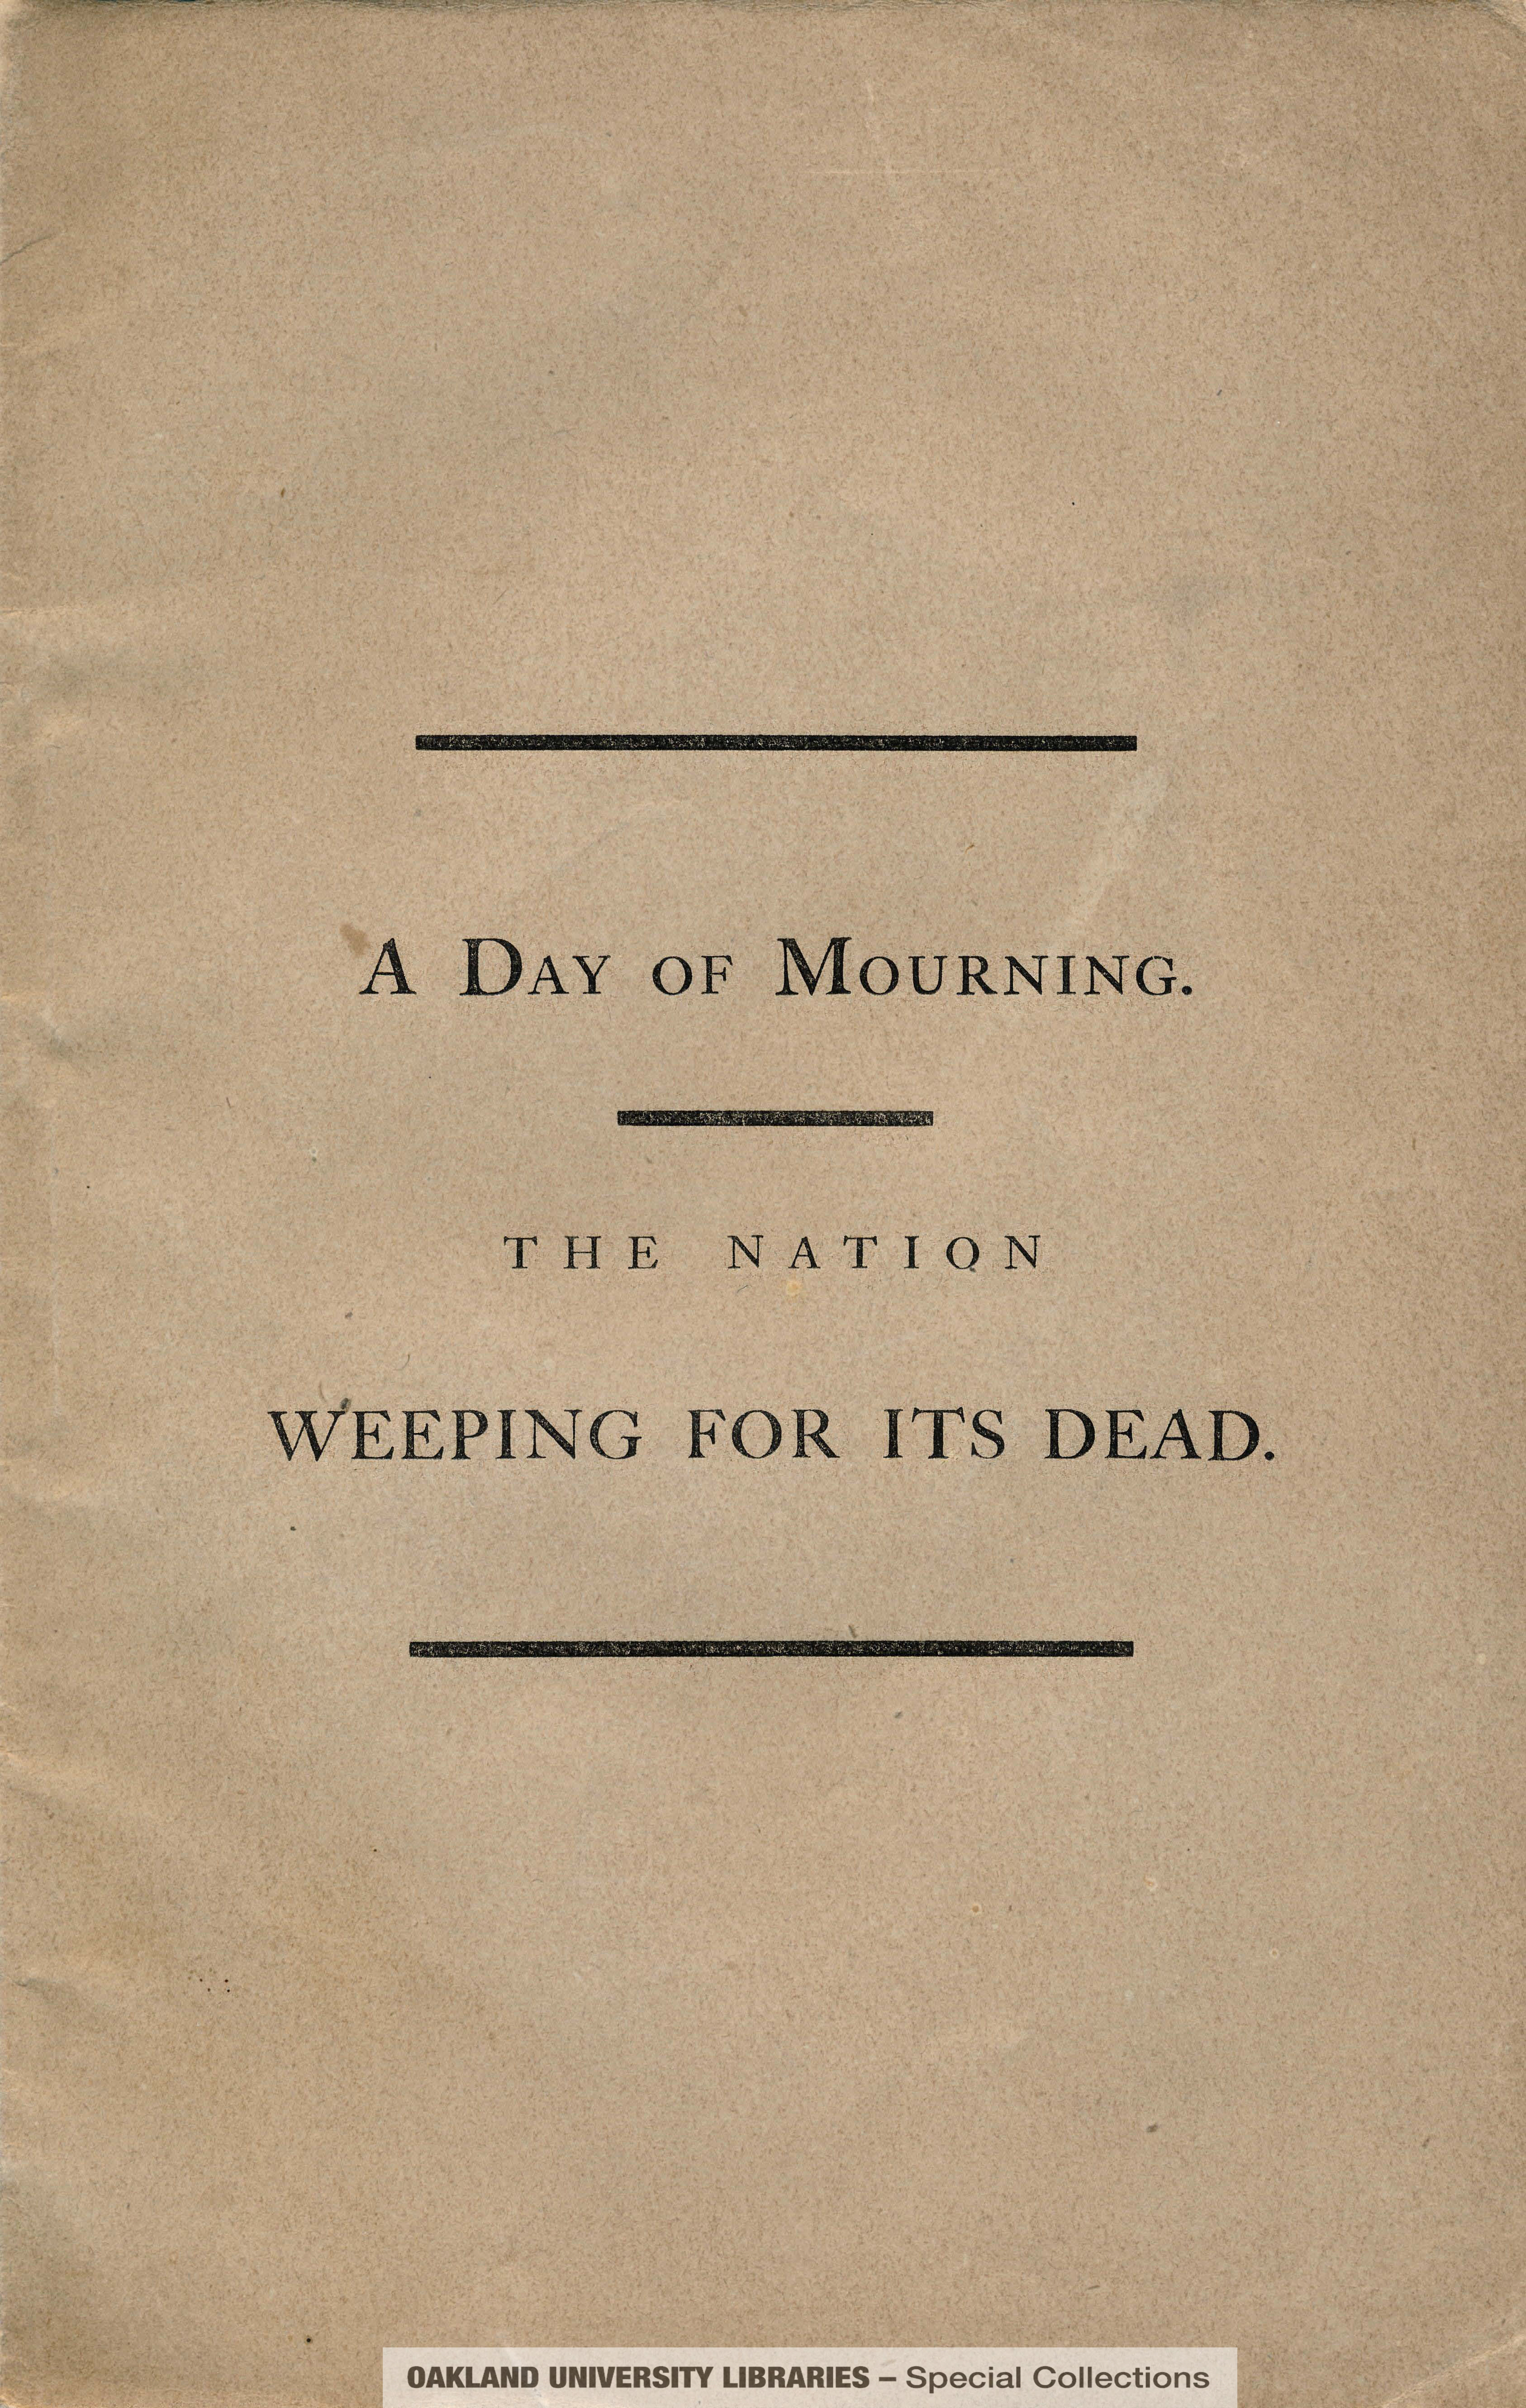 A Day of Mourning. The Nation Weeping for its Dead